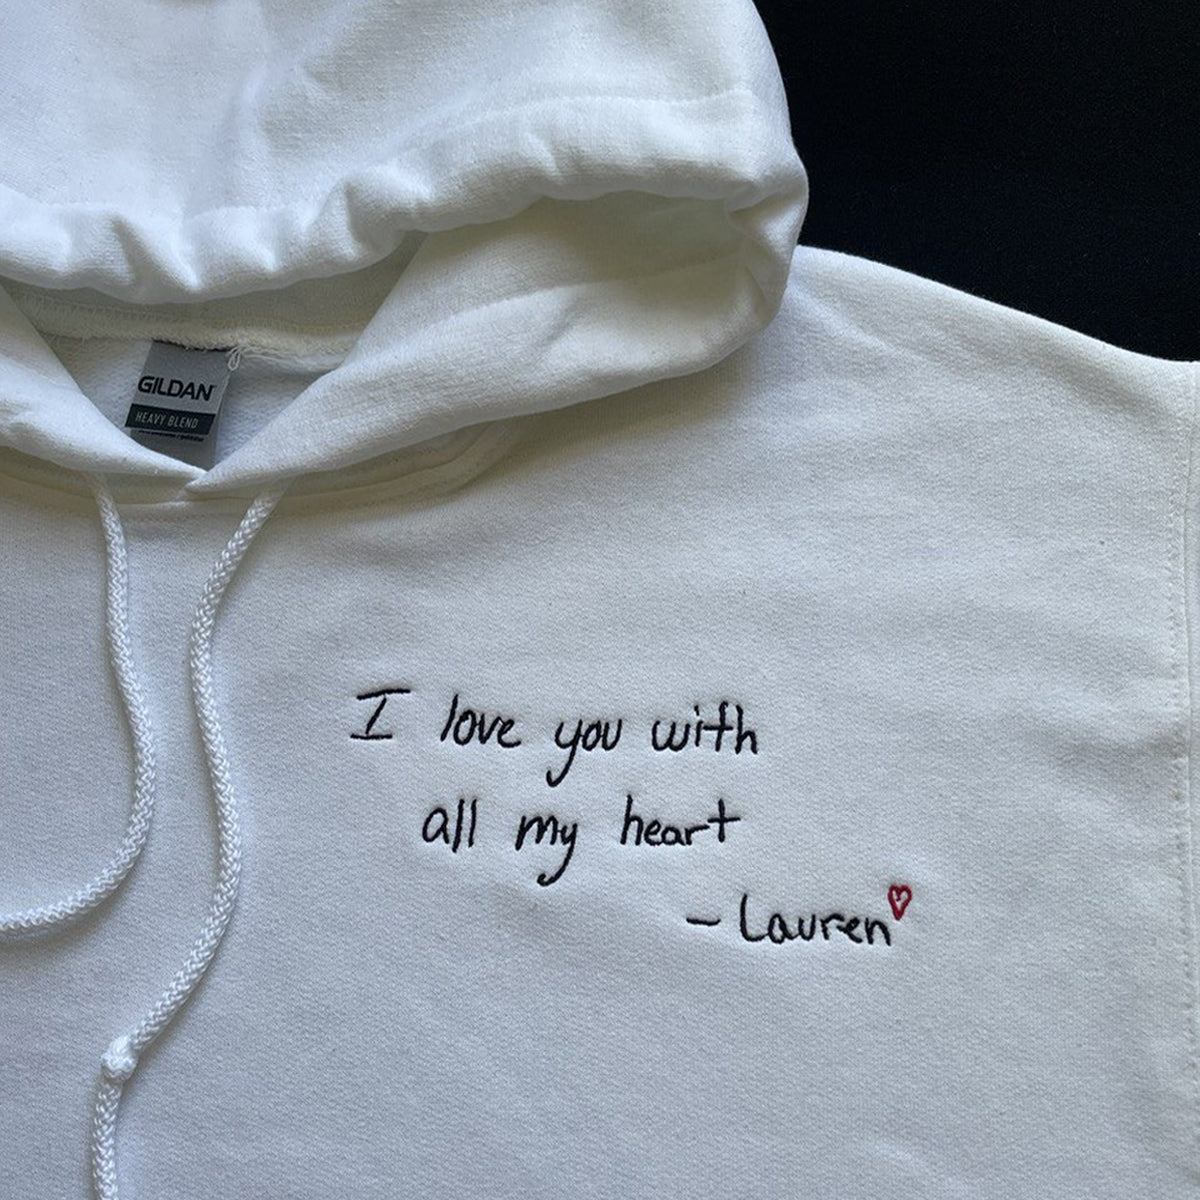 Embroly - Personalize gifts with embroidery